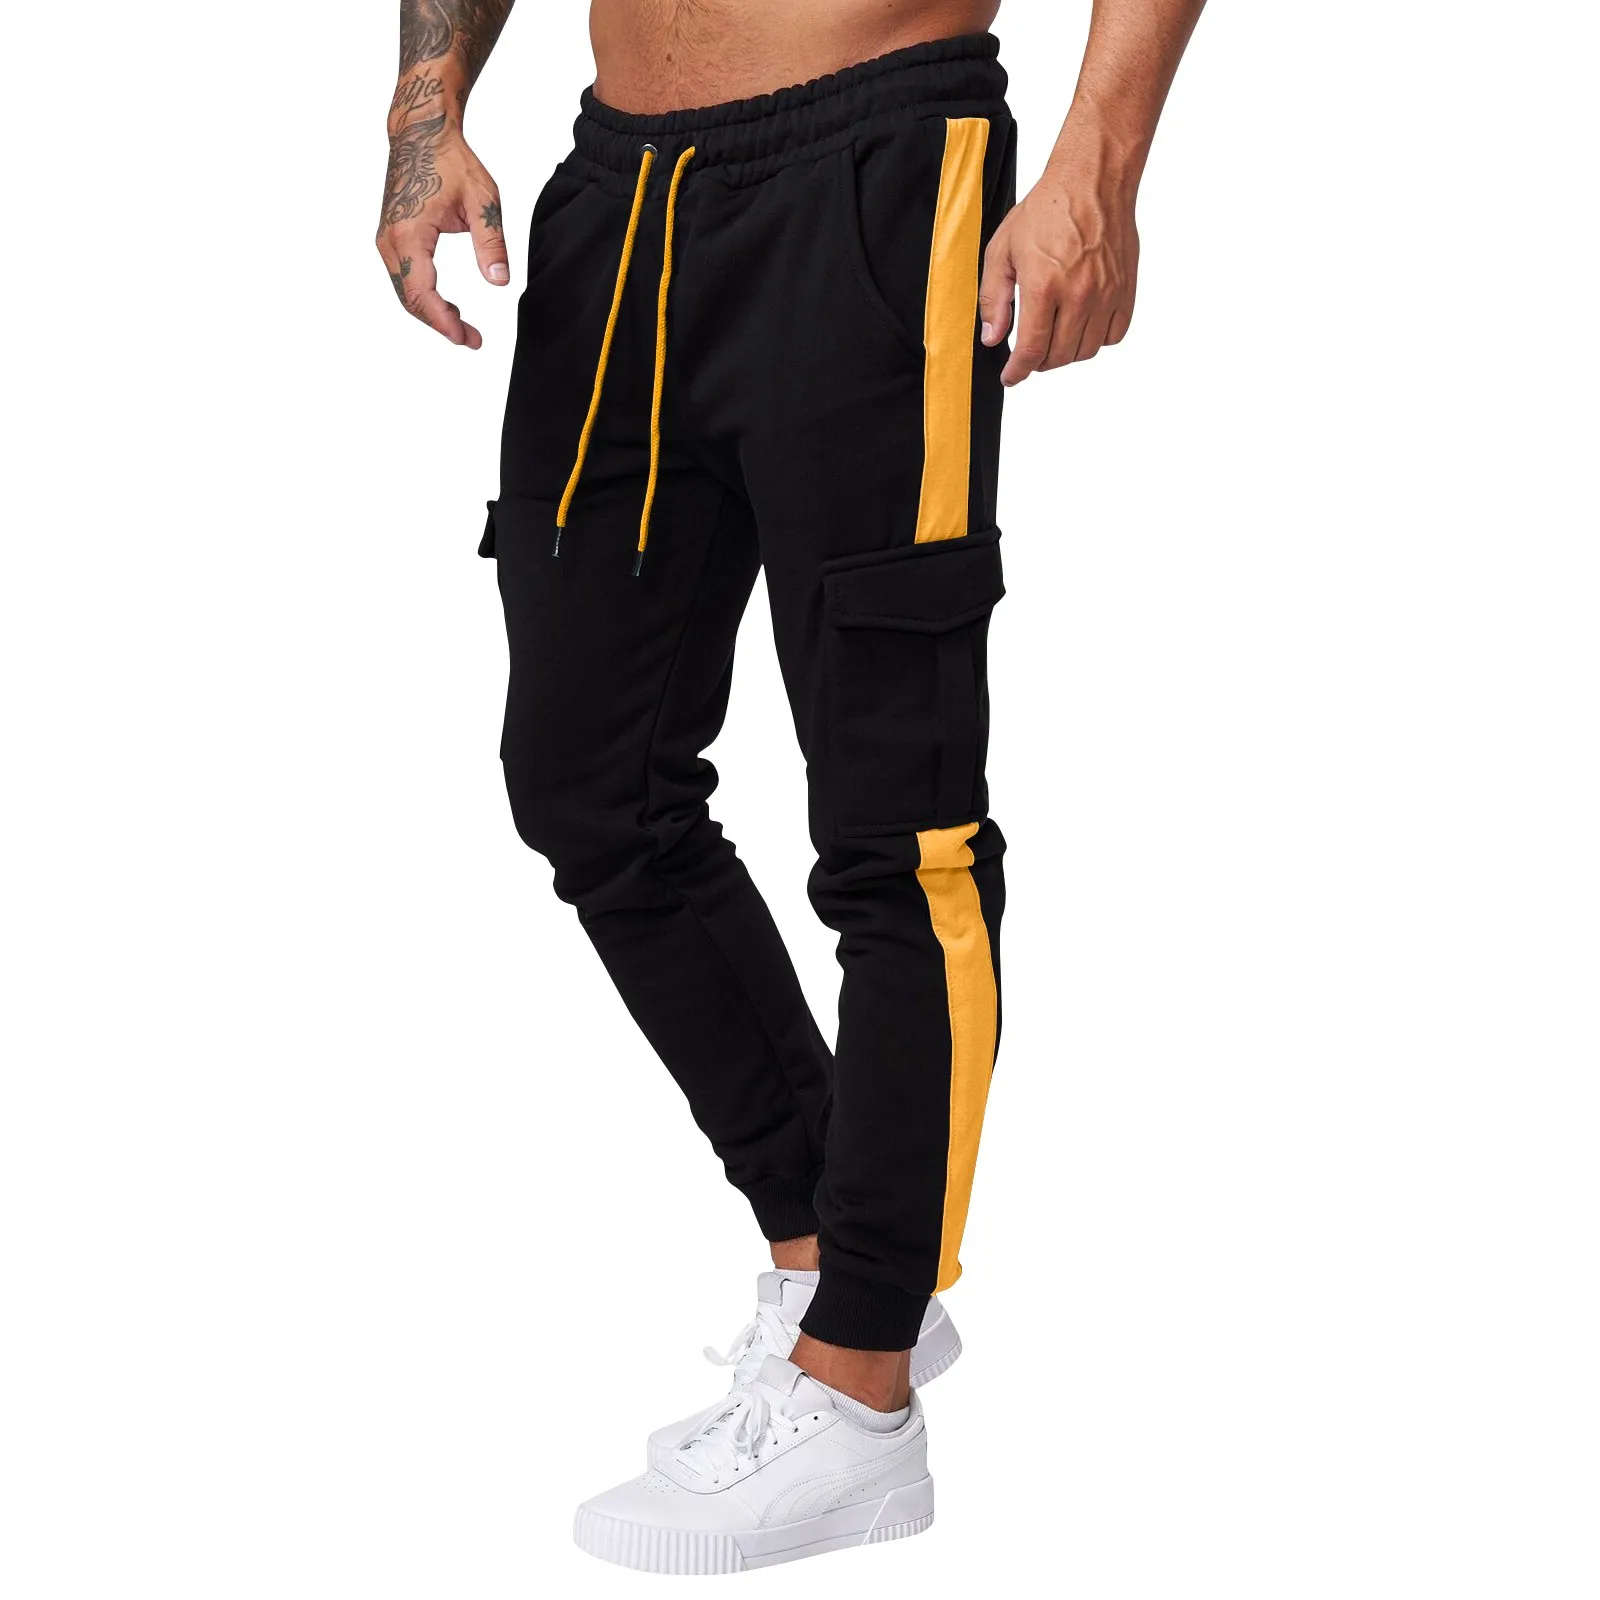 

Men'S Outdoor Sports Trousers Fashion Color-Blocked Slim Fitting Sweatpants With Multy Pockets Daily Casual Commuting Pants